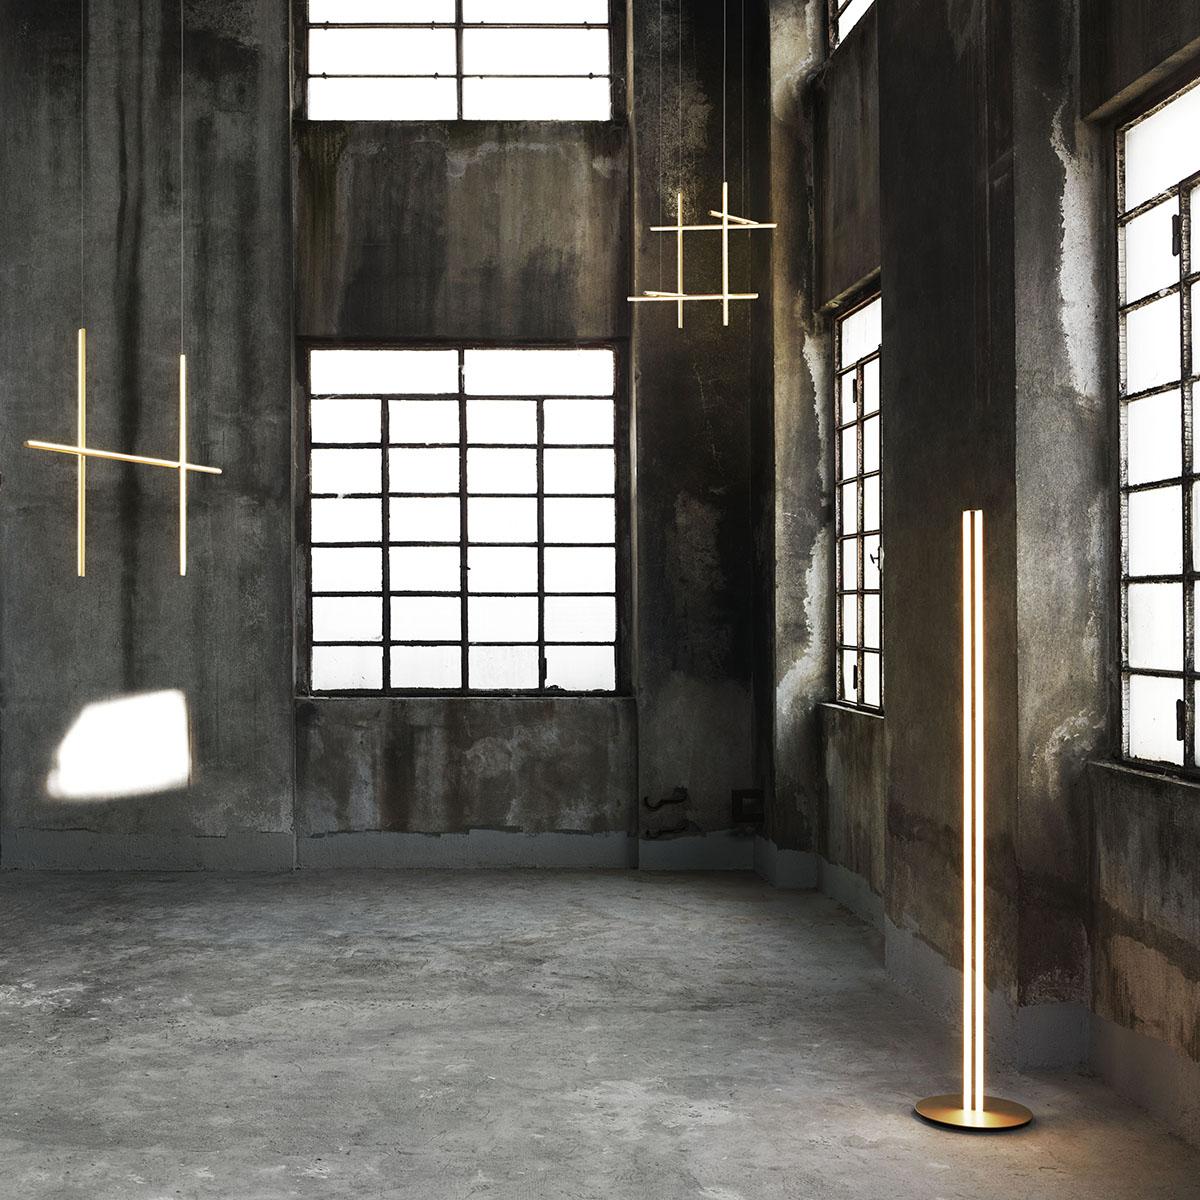 Anodized Flos Coordinates Module Ceiling Light in Champagne by Michael Anastassiades